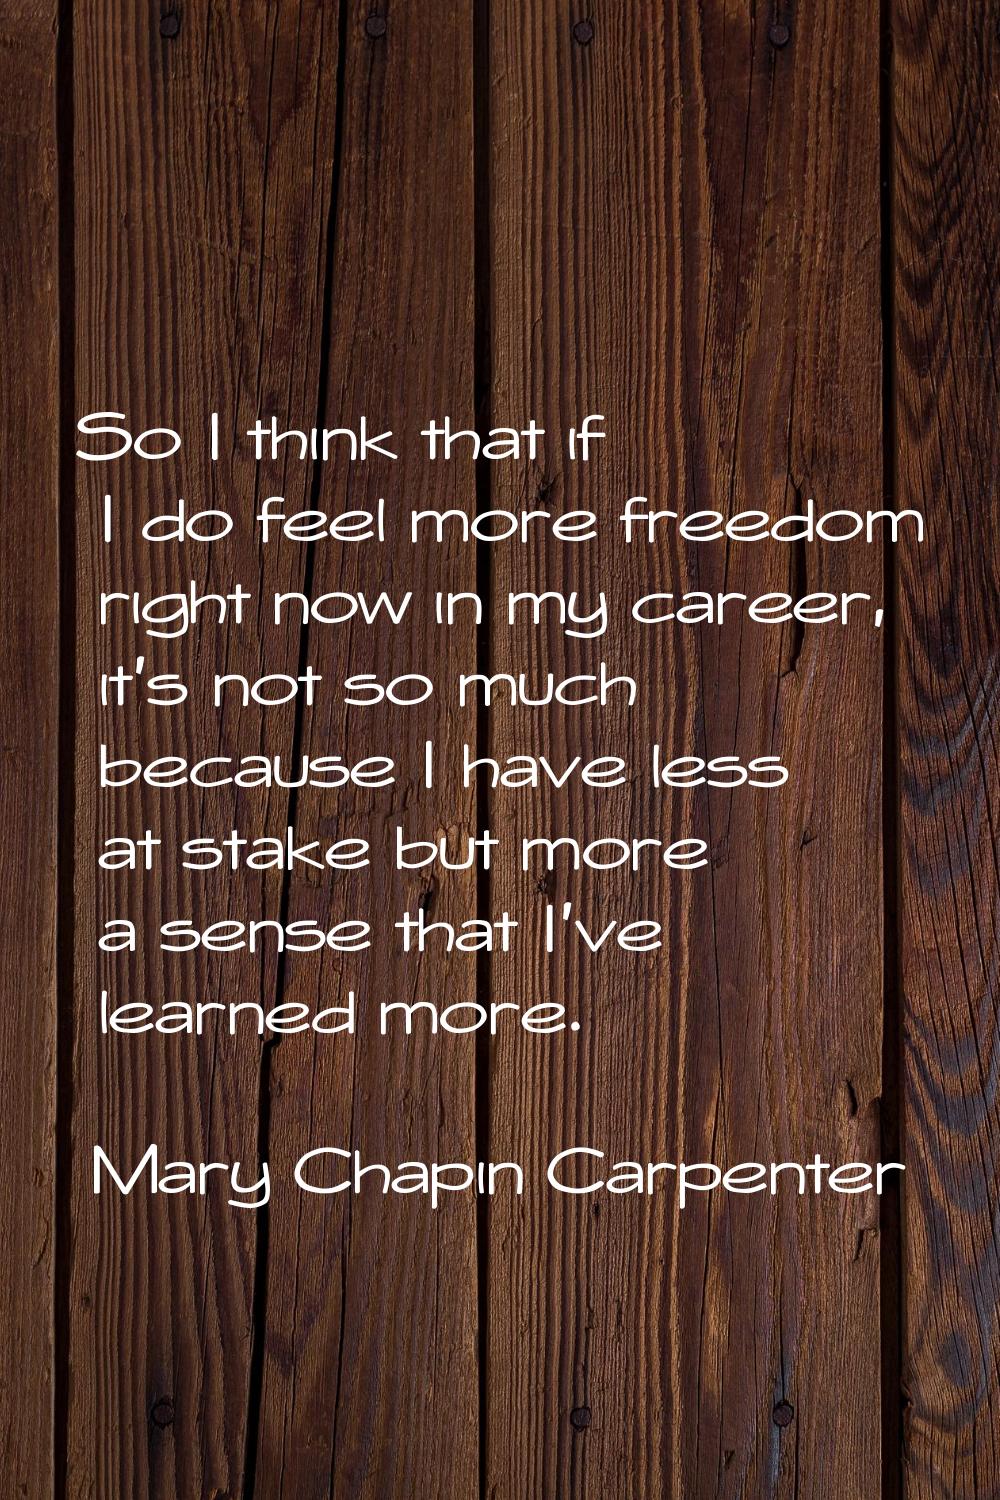 So I think that if I do feel more freedom right now in my career, it's not so much because I have l